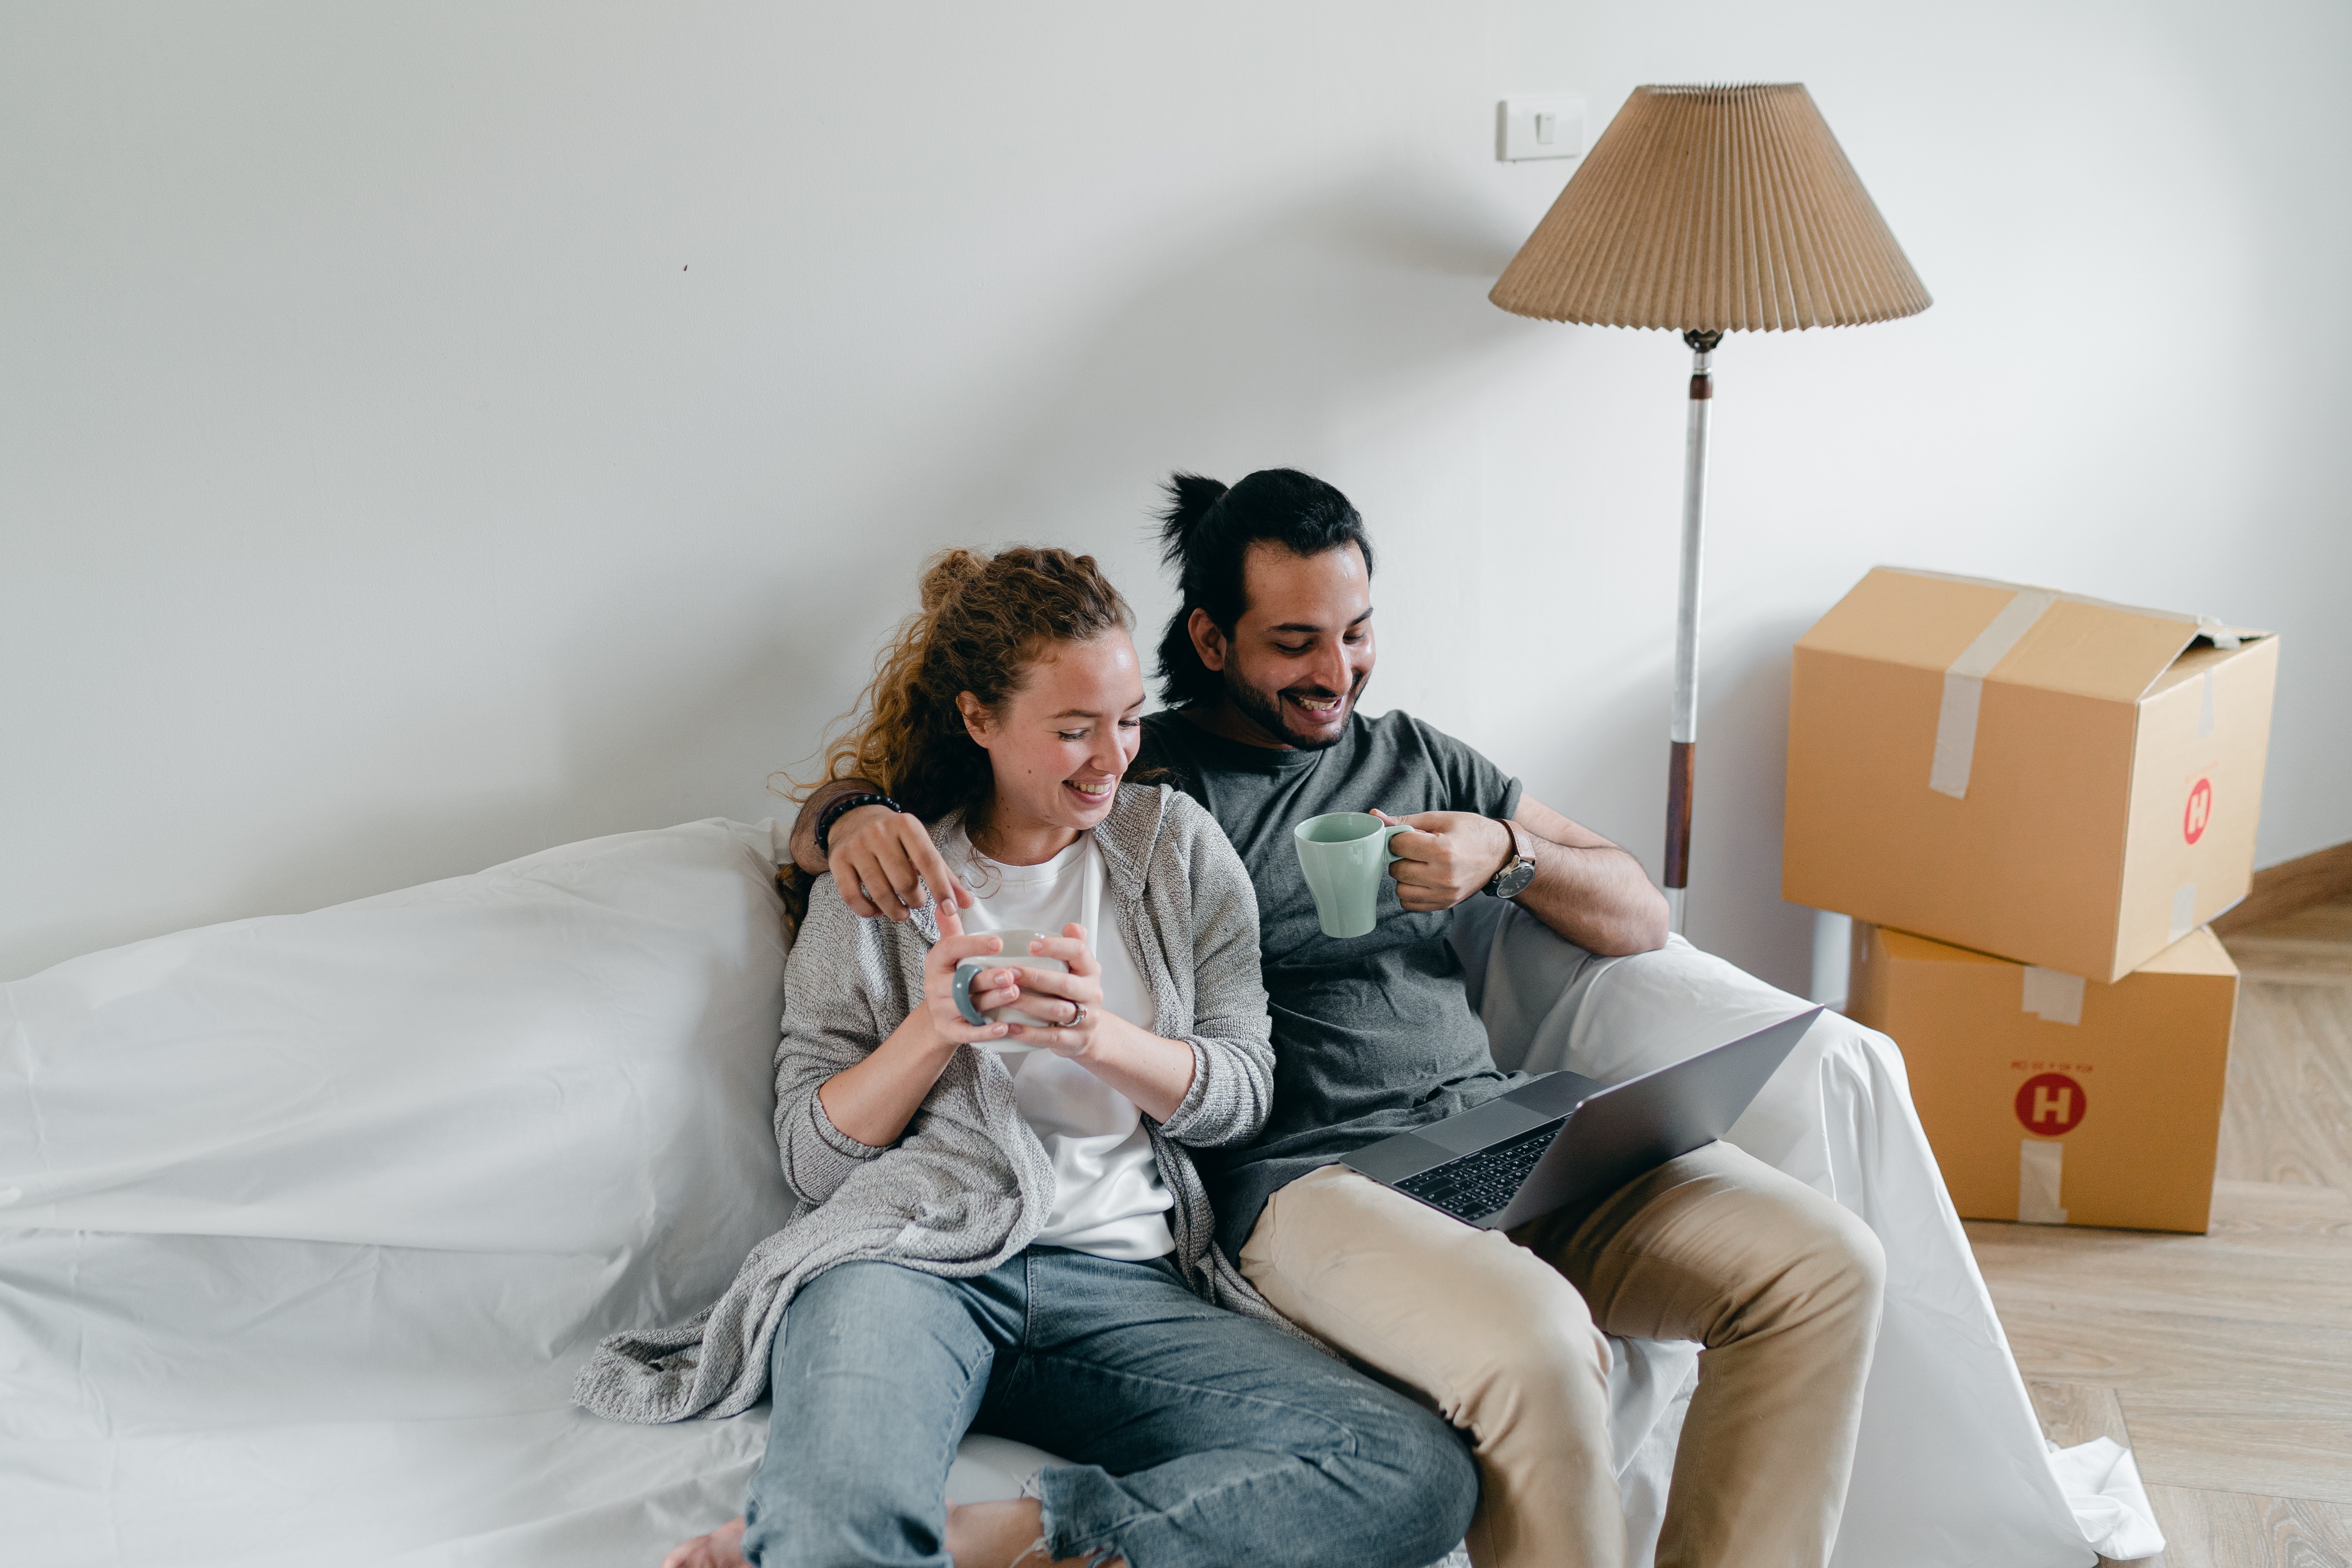 A couple watching a laptop at home. | Source: Pexels